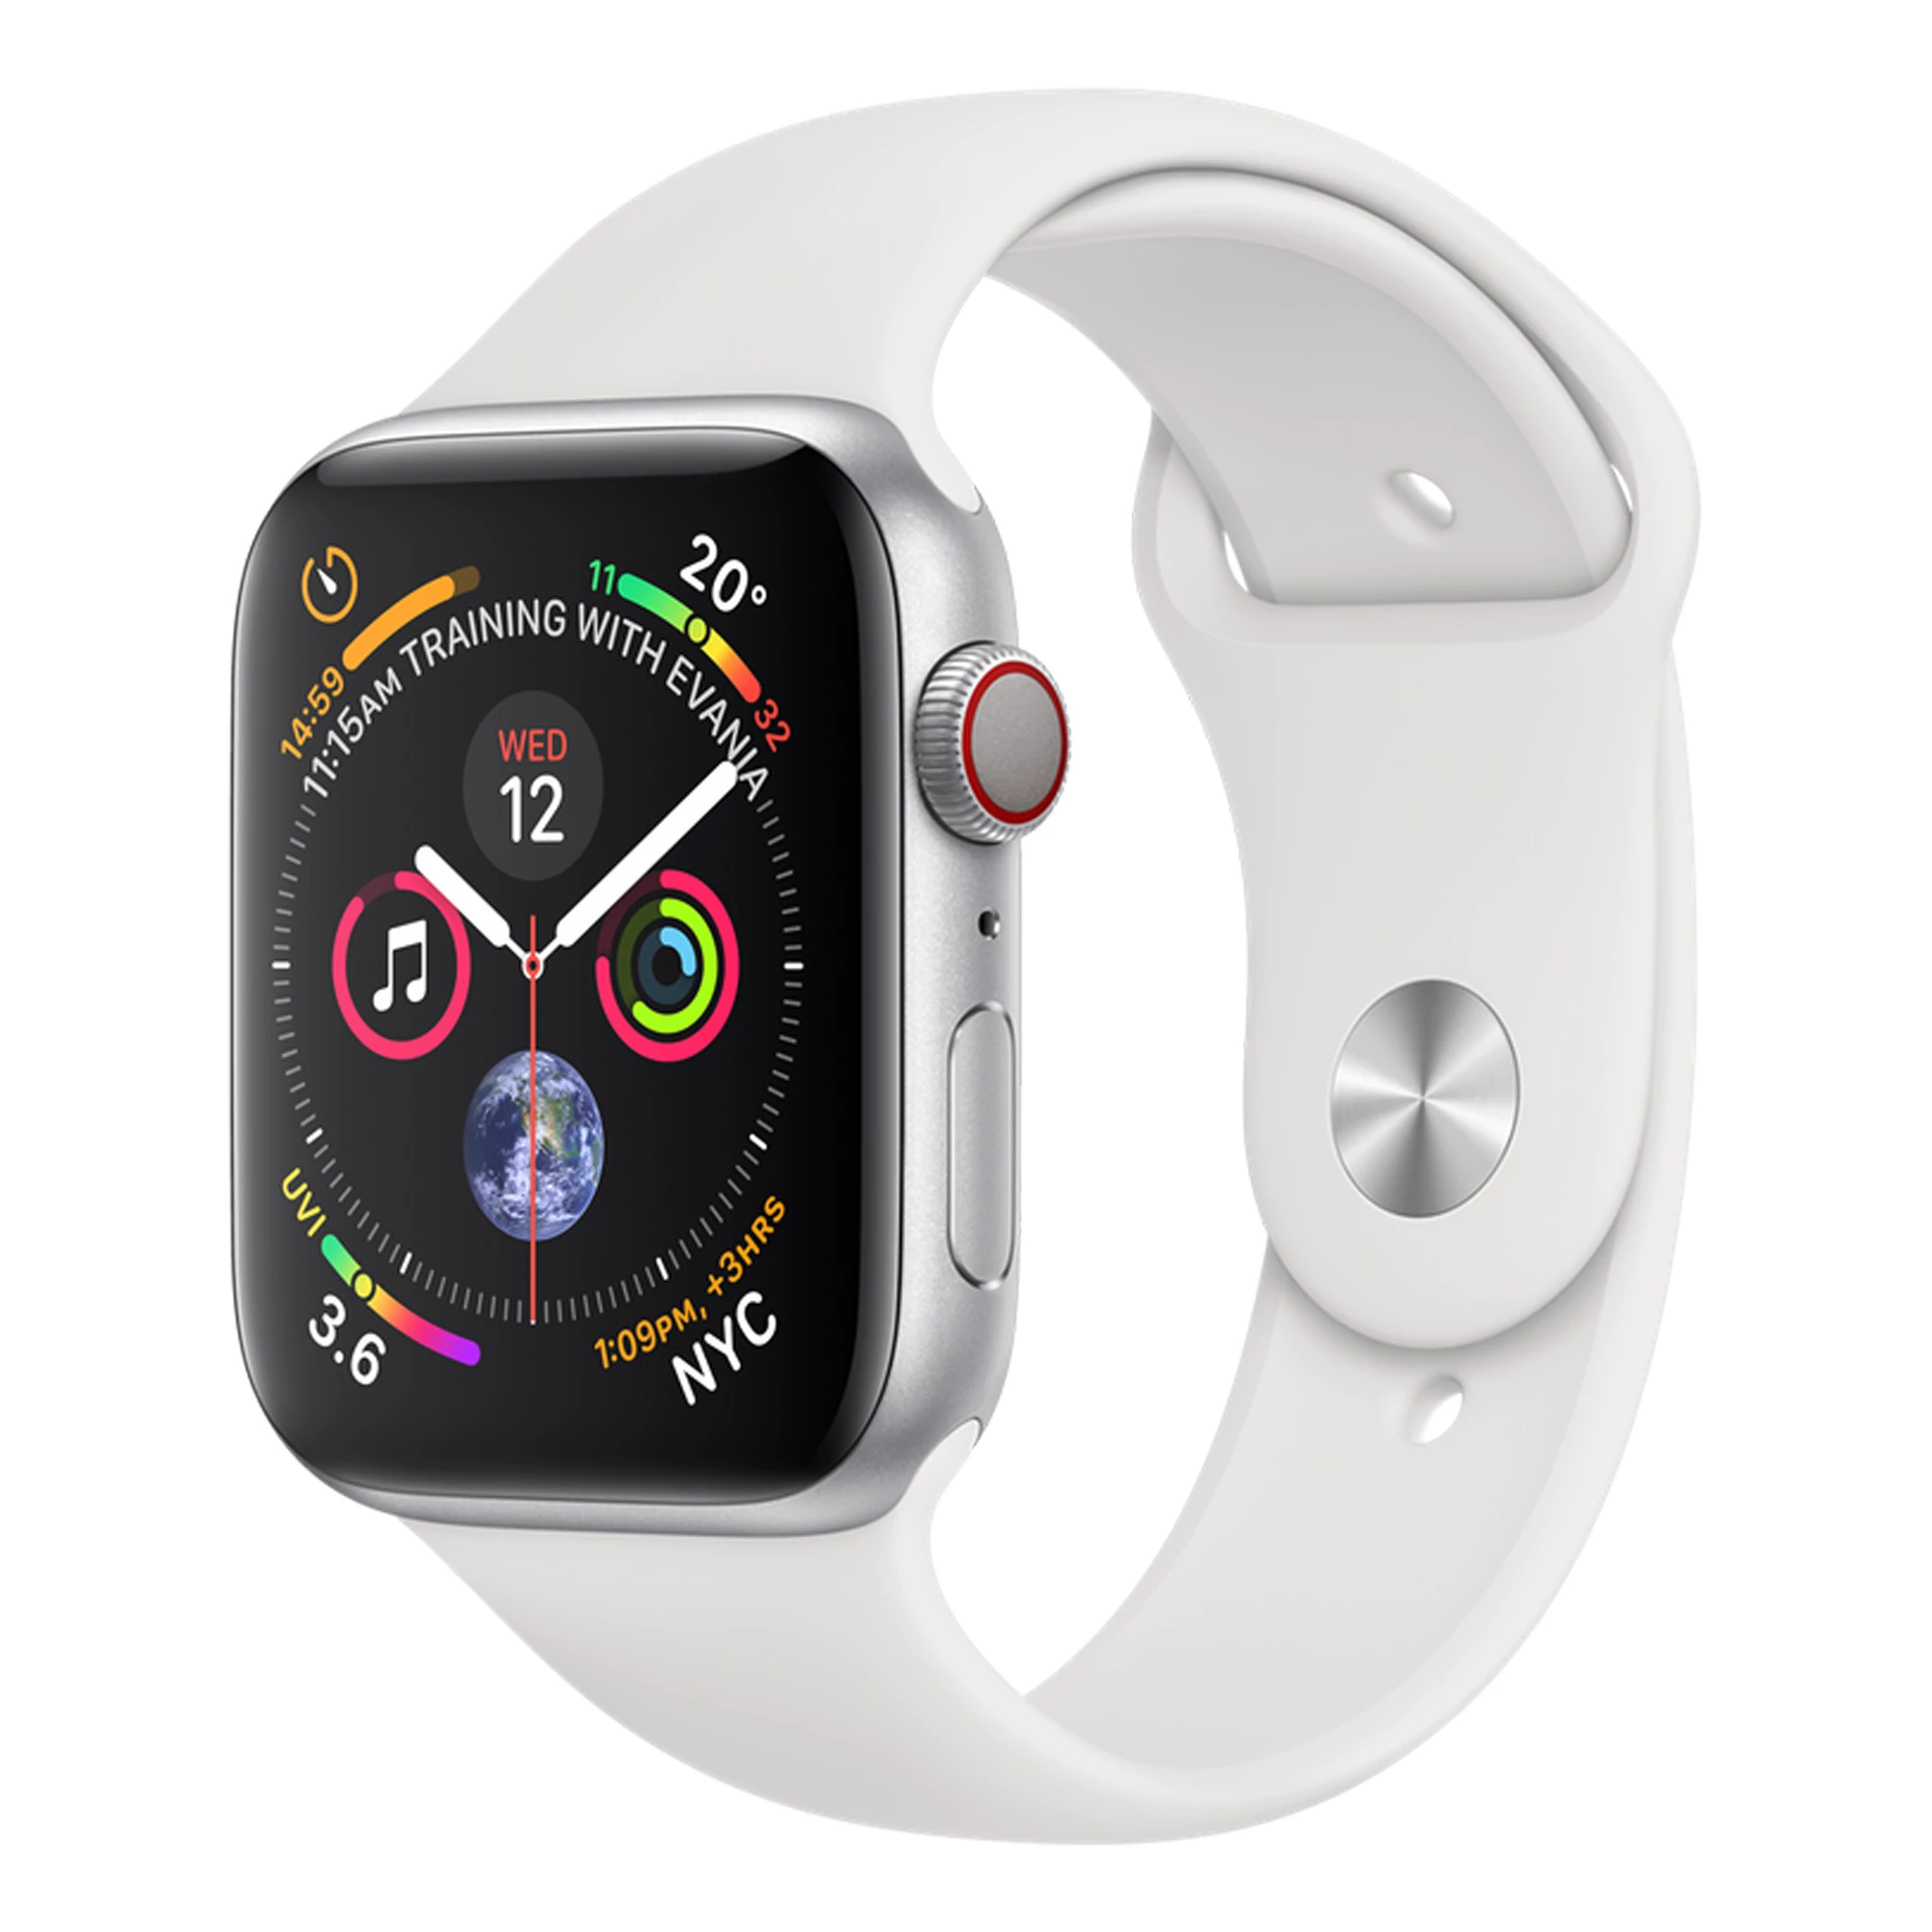 Apple Watch Series 4 (GPS + Cellular) 44mm Silver Aluminum Case with White Sport Band (MTUU2, MTVR2)